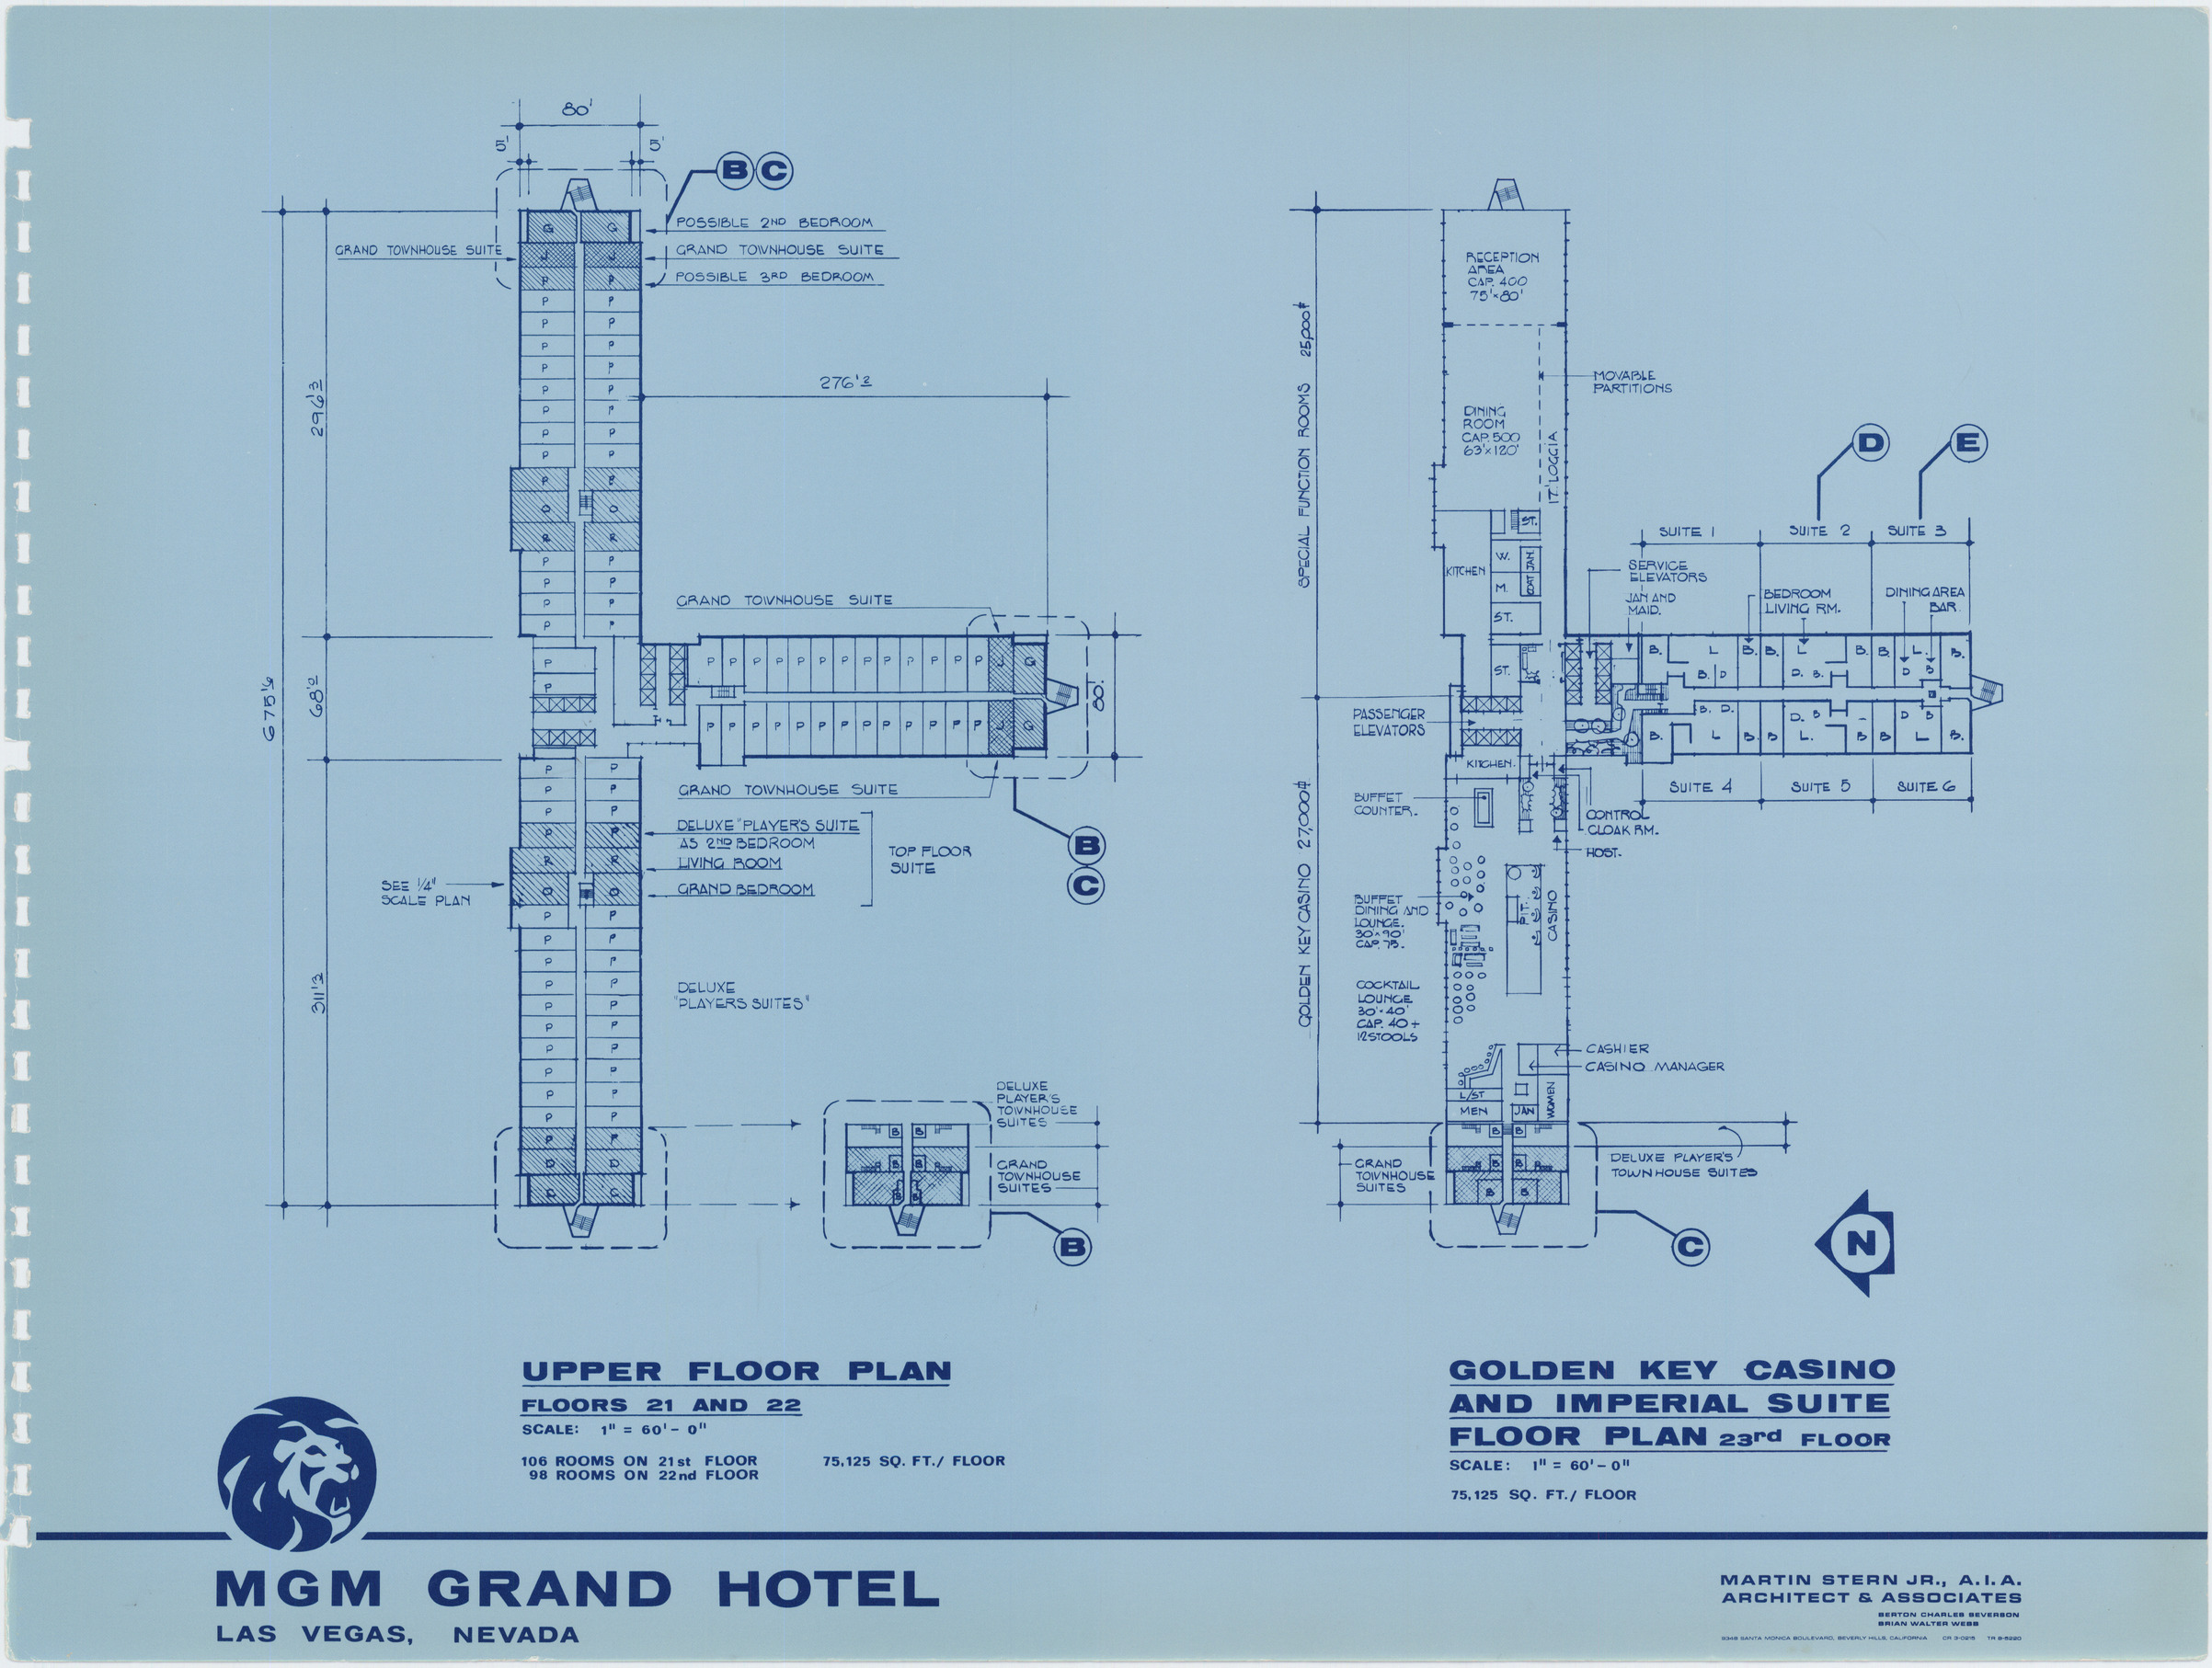 Proposal for the MGM Grand Hotel (Las Vegas), circa 1972, image 12